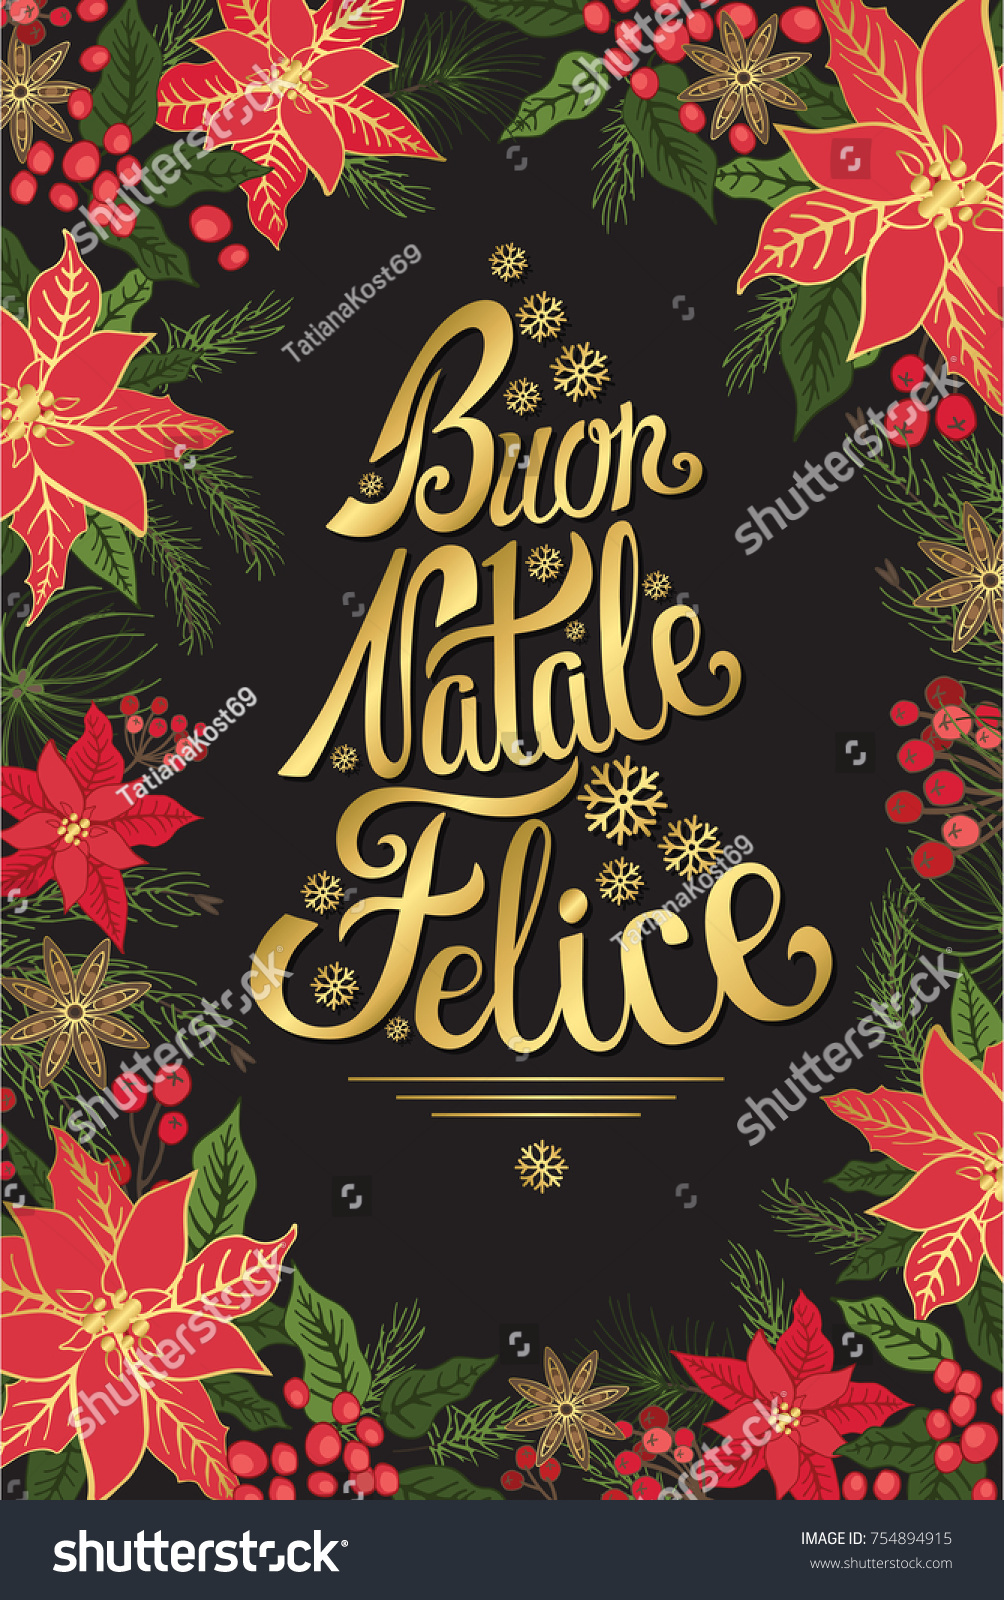 Buon Natale Images.Christmas Party Buon Natale Invitationdesign Templateflyerticket Stock Vector Royalty Free 754894915